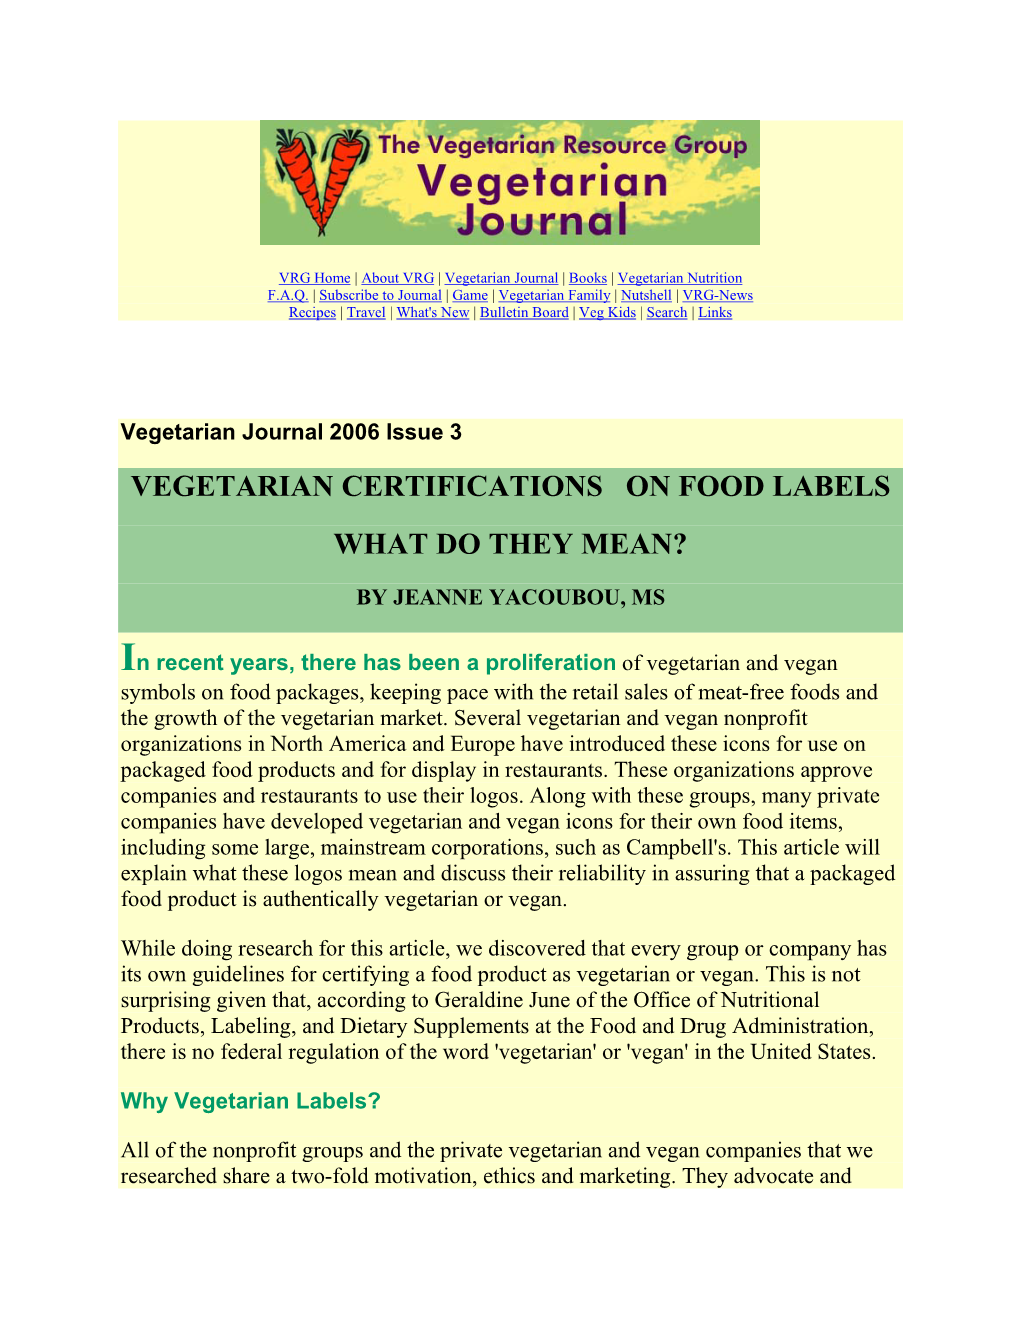 Vegetarian Certifications on Food Labels What Do They Mean?